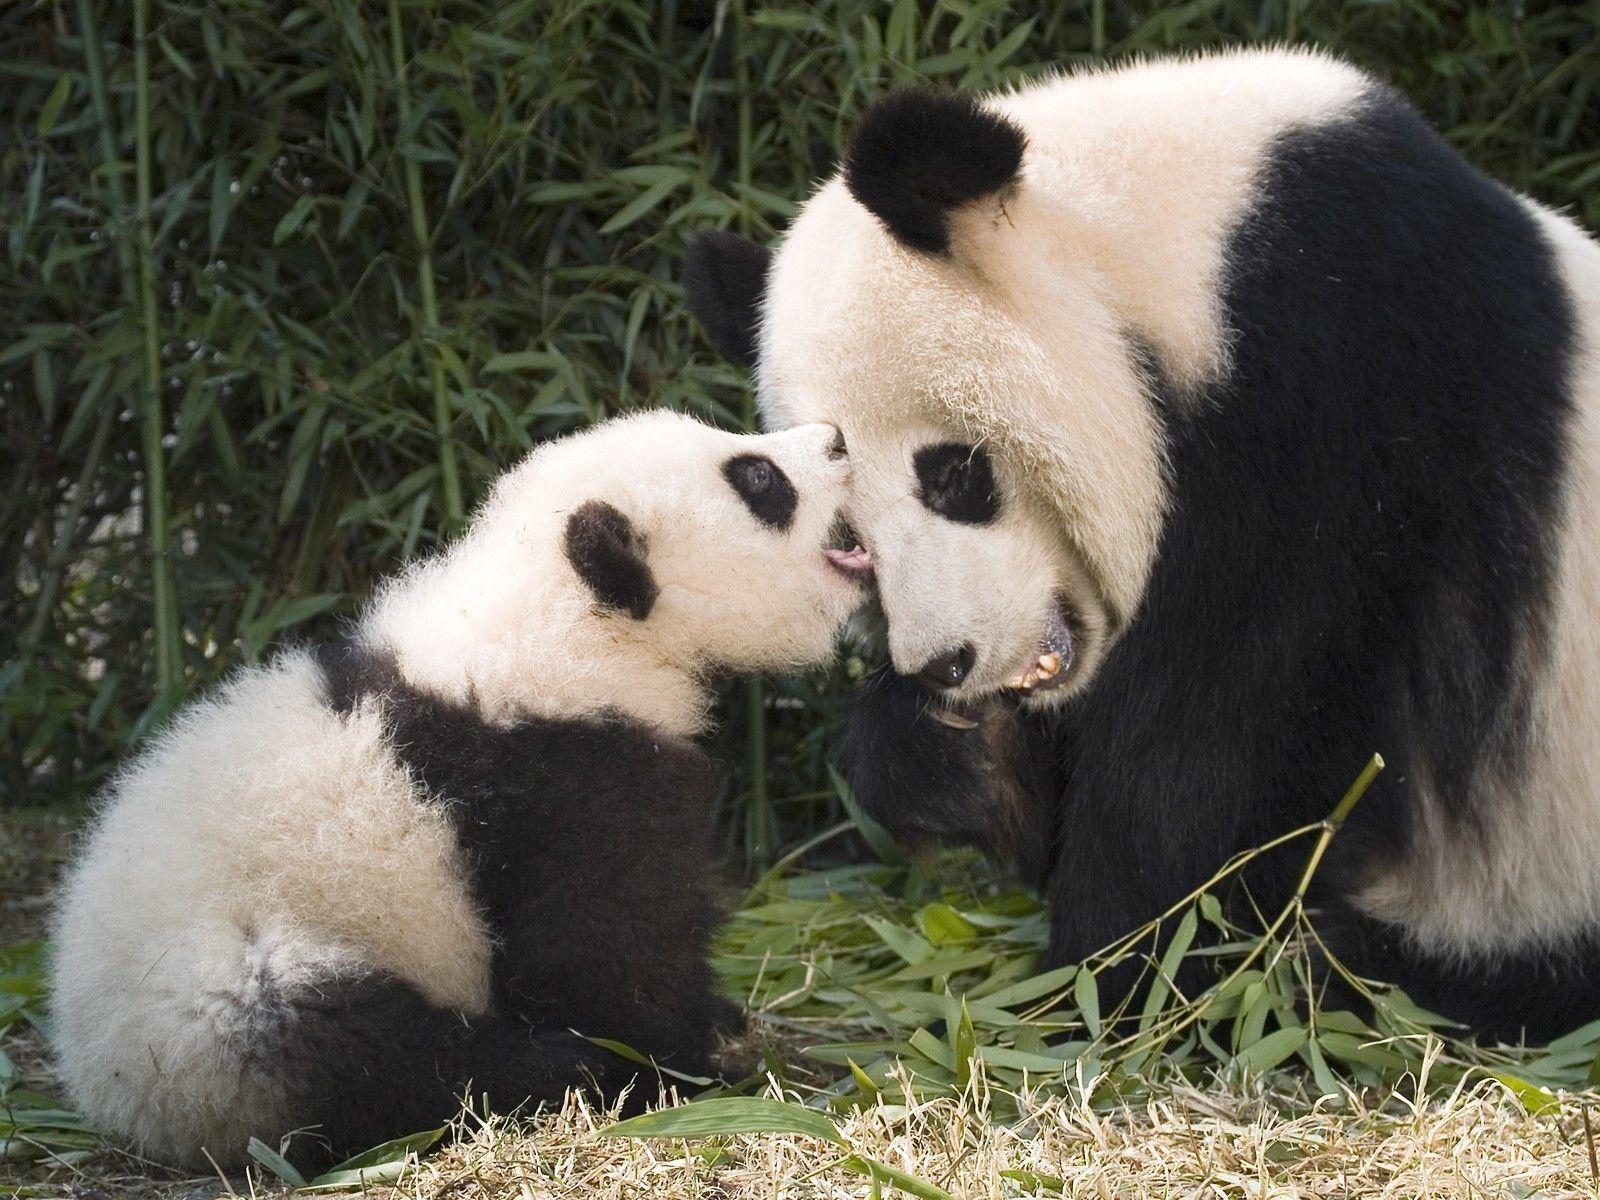 Panda cub with mom wallpaper and image, picture, photo